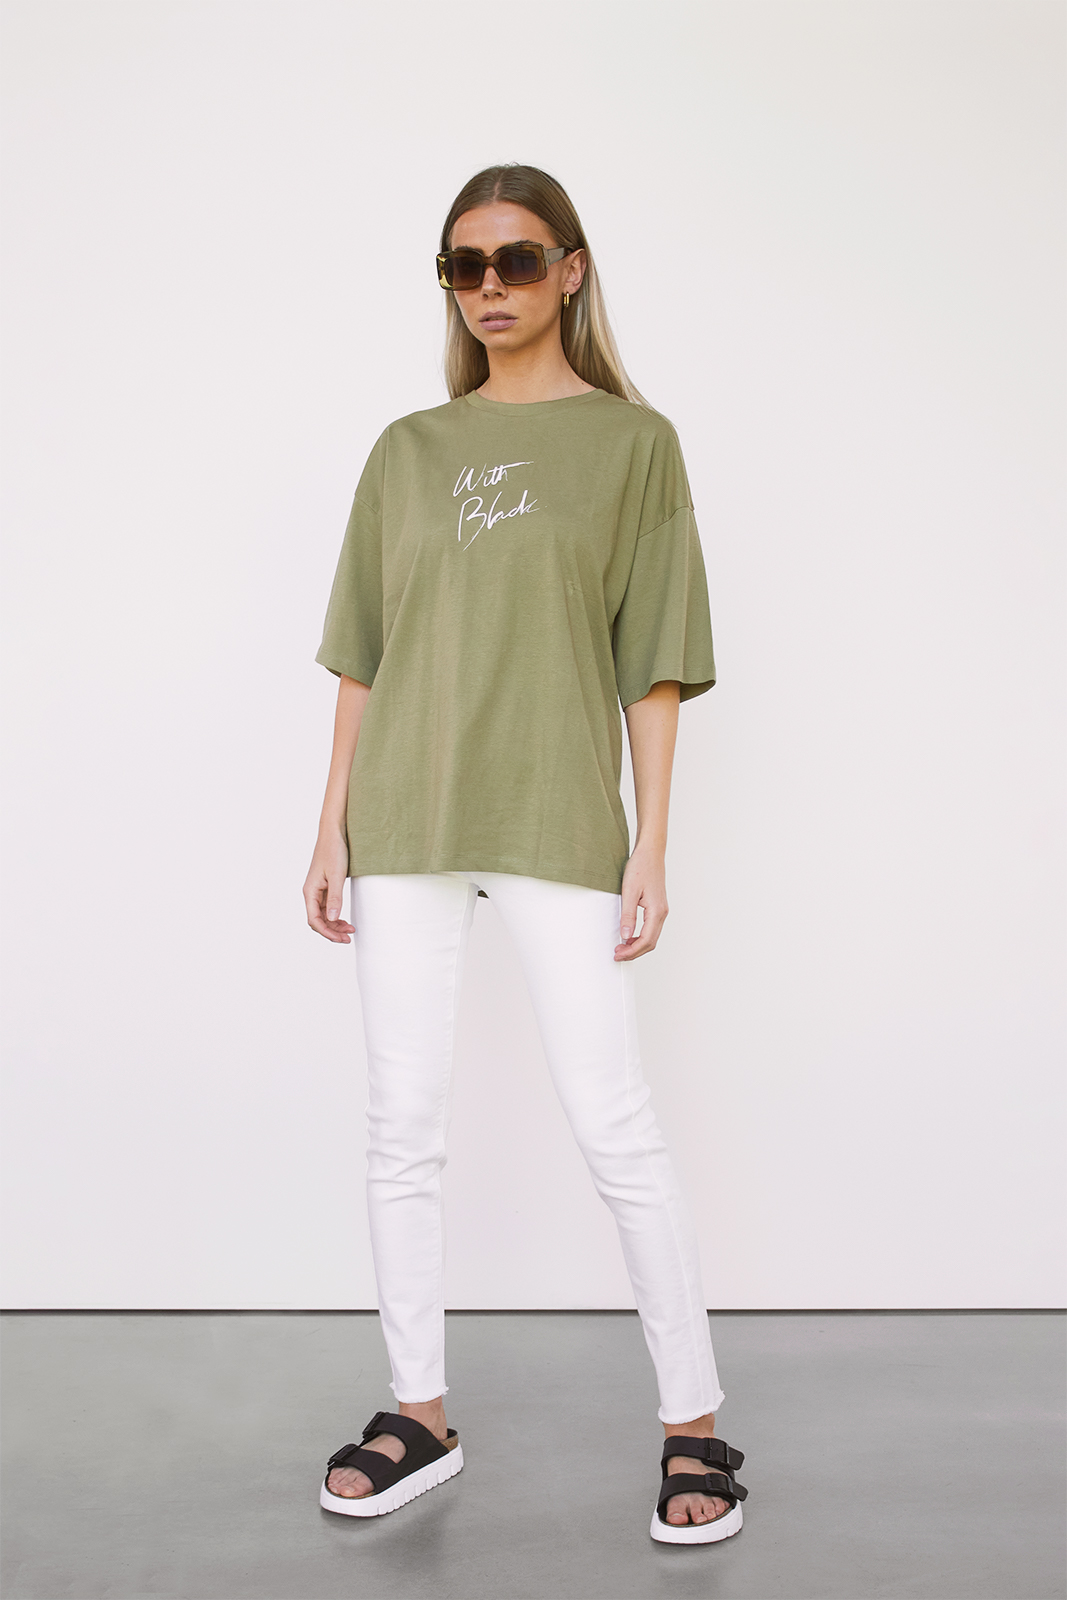 woman is wearing white jeans and a green tee